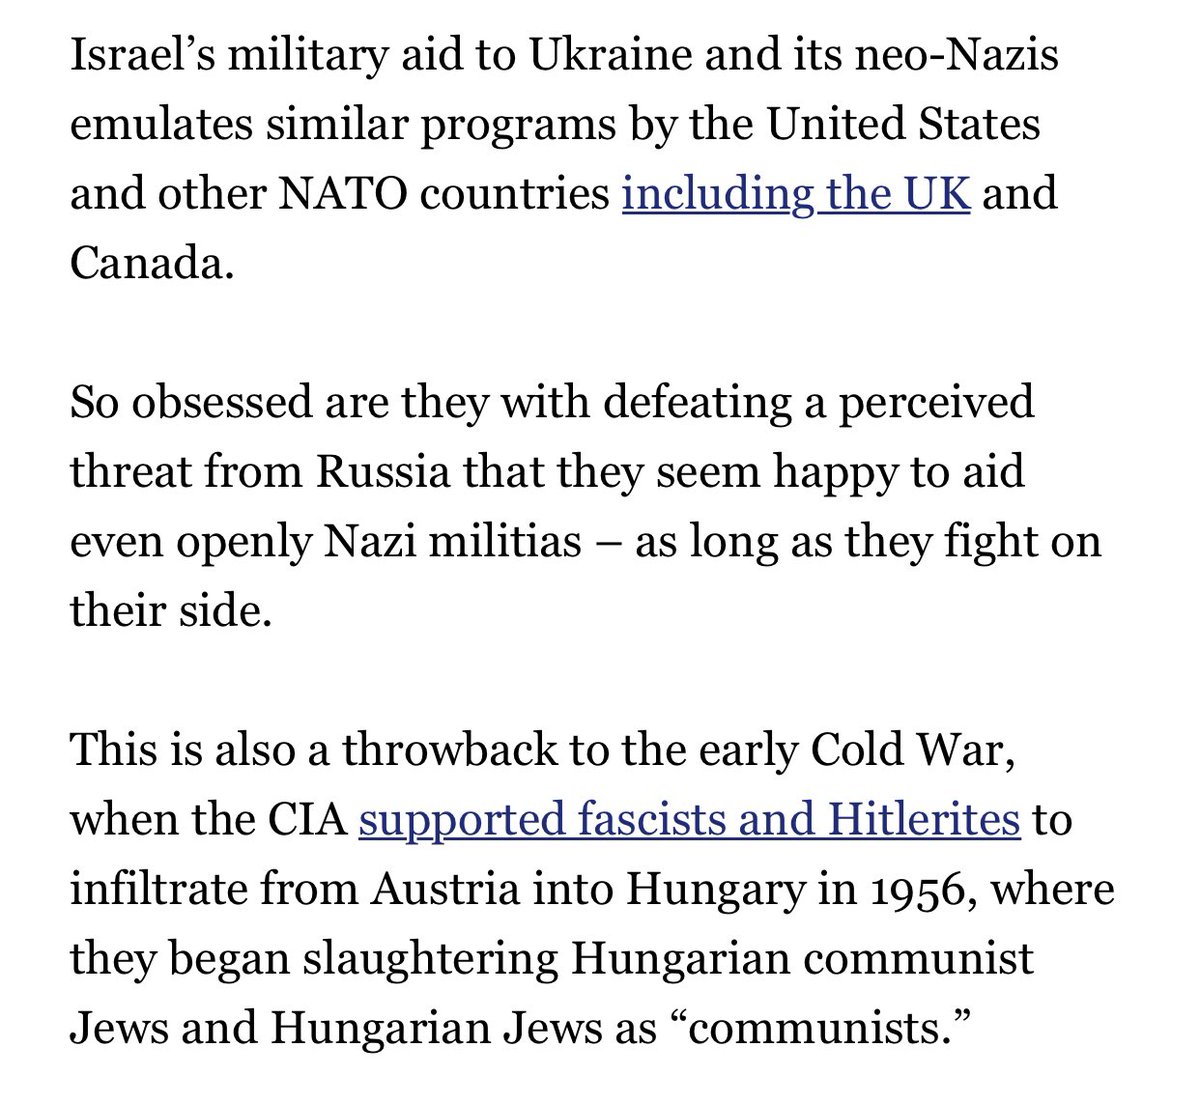 This was a long time coming. The U.S, Israel and Western governments knowingly abetted in training & arming Neo-Nazis in Ukraine. Source:  https://electronicintifada.net/content/israel-arming-neo-nazis-ukraine/24876